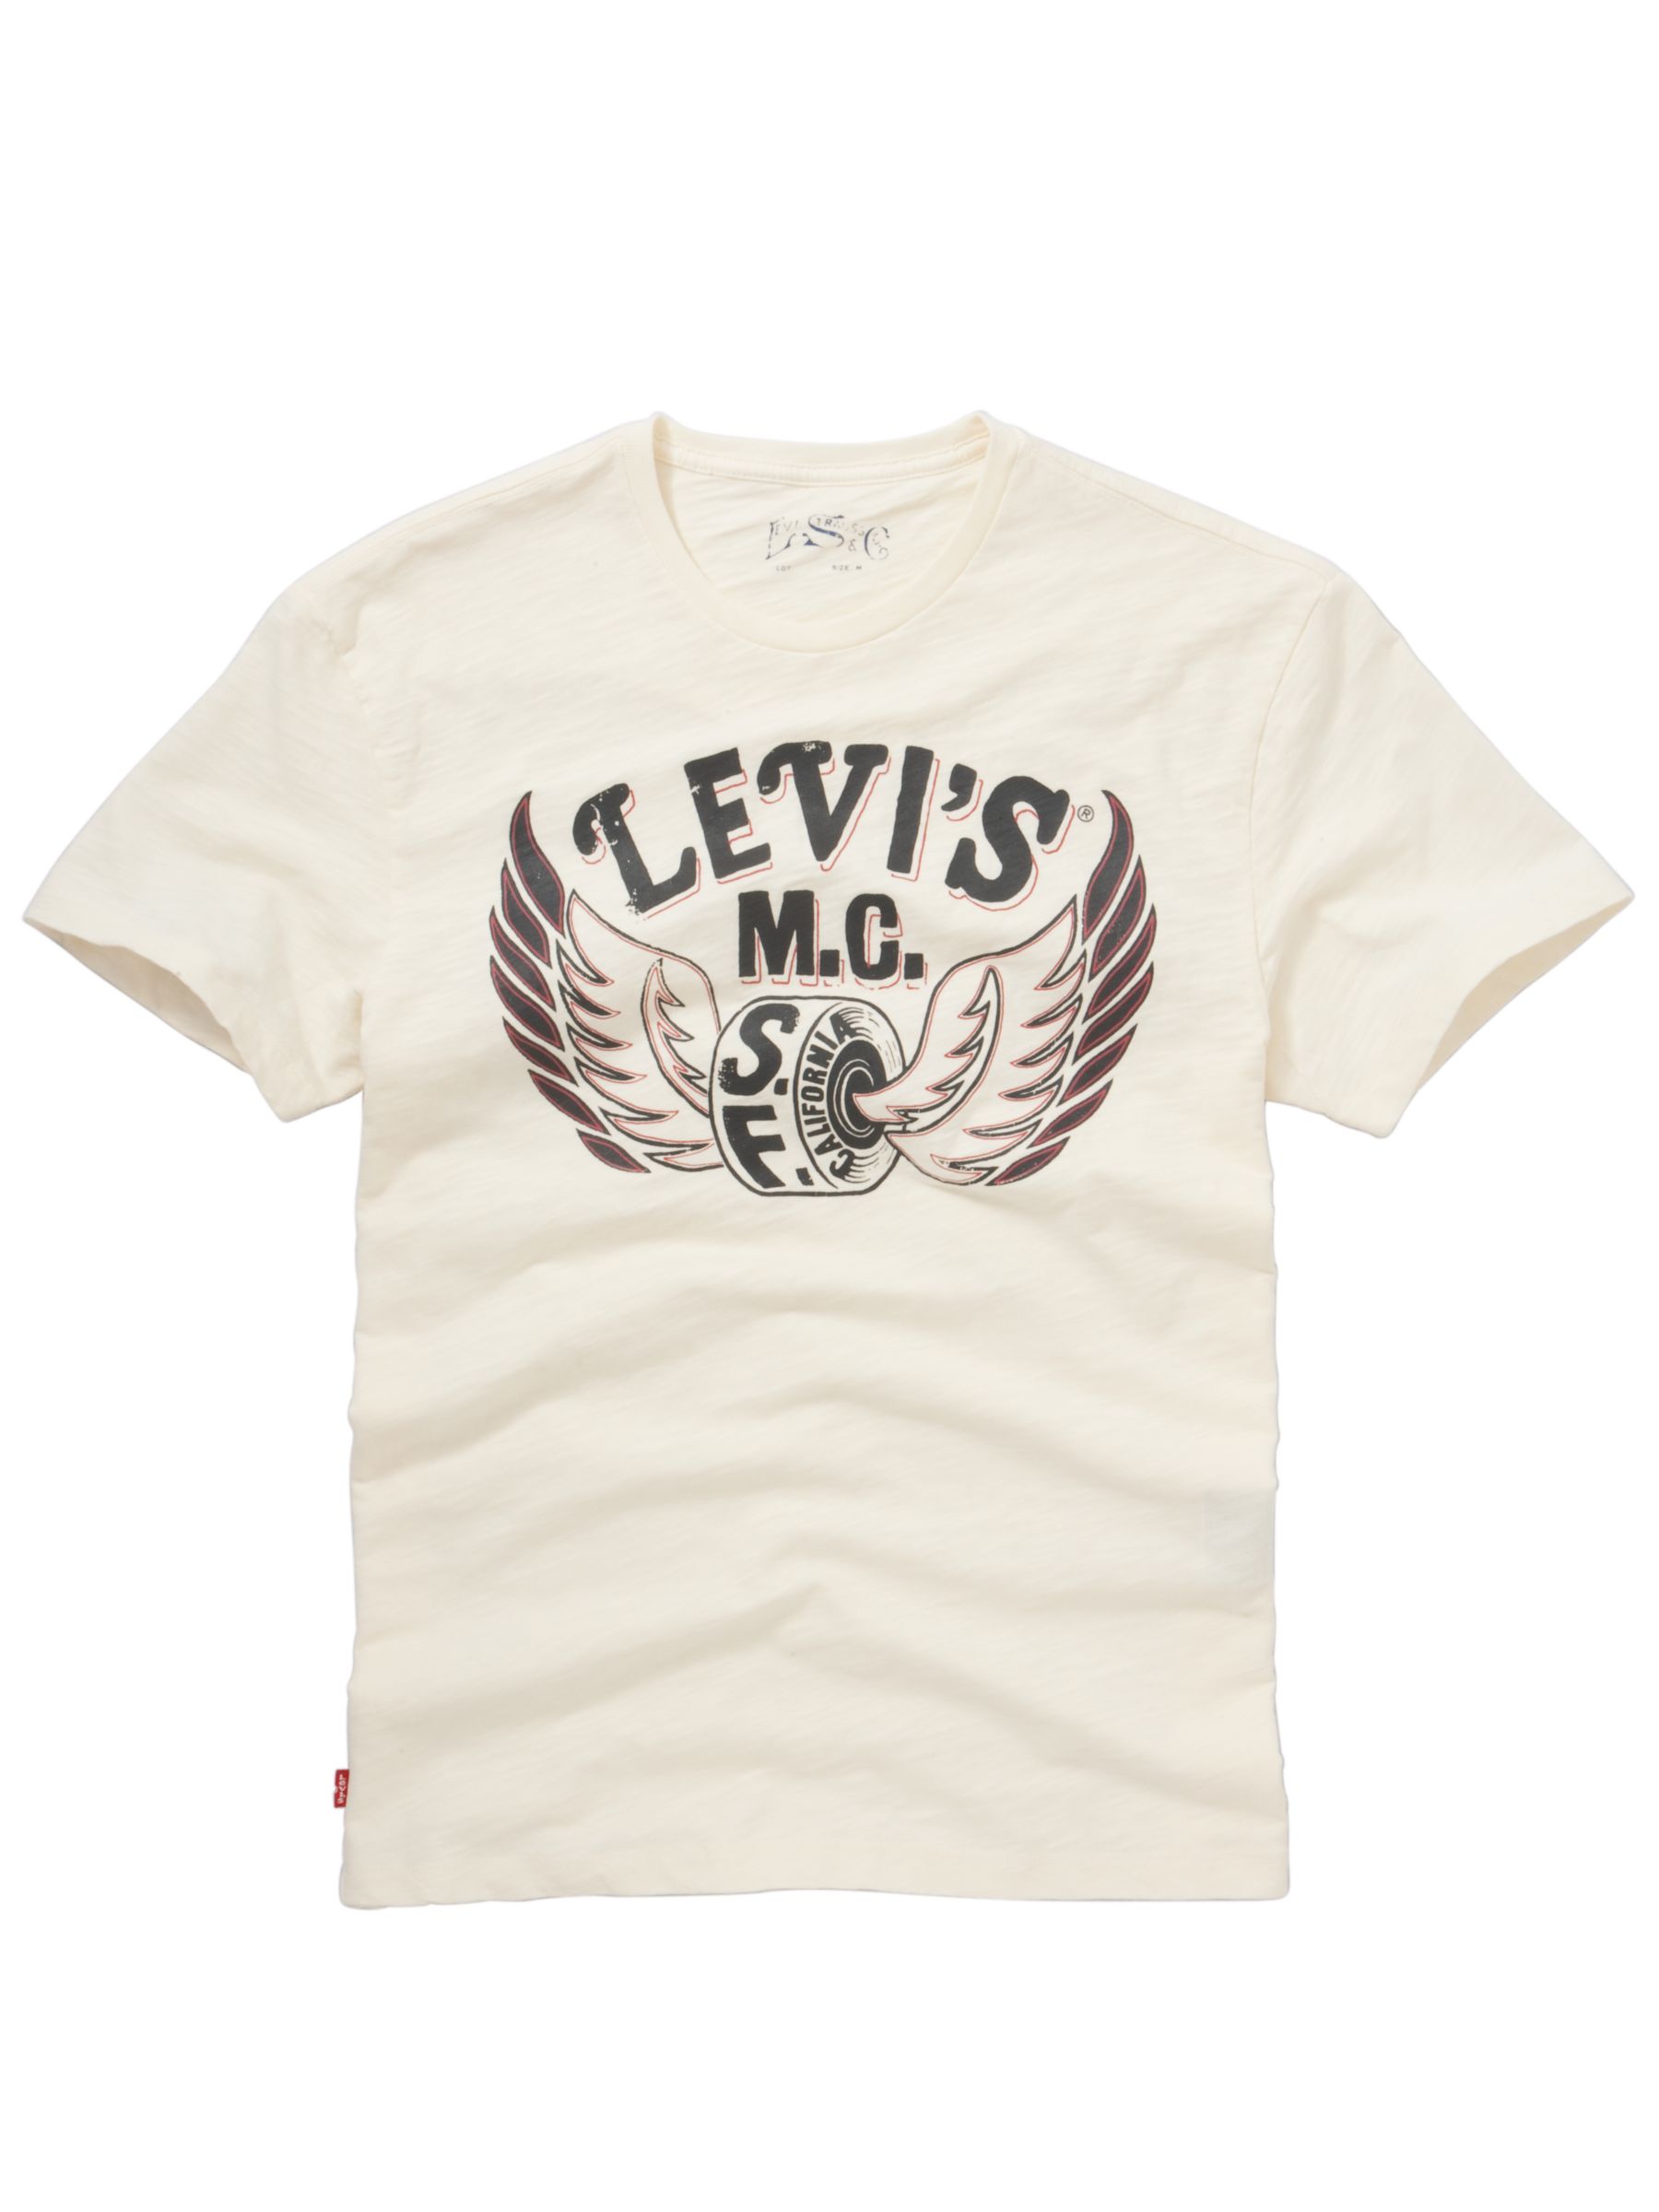 Rollers Wing T-Shirt, Cream